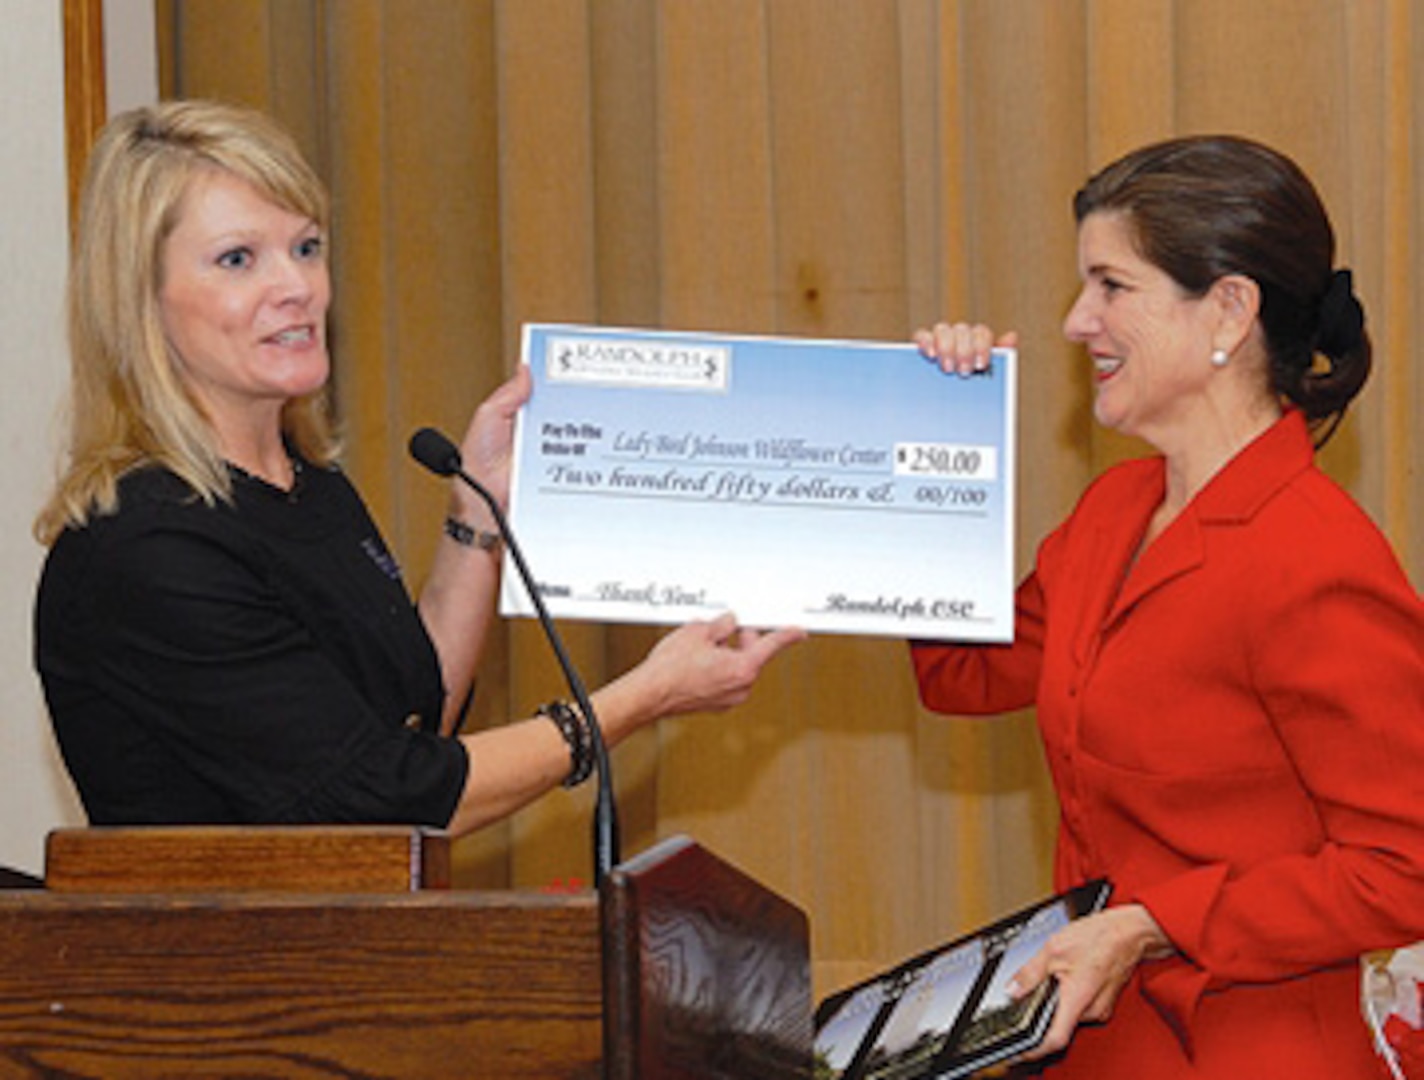 Jennifer Pleus (left), president of the Randolph Officers’ Spouses’ Club, presents Luci Baines Johnson, daughter of President Lyndon Baines Johnson, with a monetary donation to the Lady Bird Johnson Wildflower Center in Austin. Ms. Johnson spoke to club members during a luncheon Feb. 21 at the officers’ club. Photo by Rich McFadden